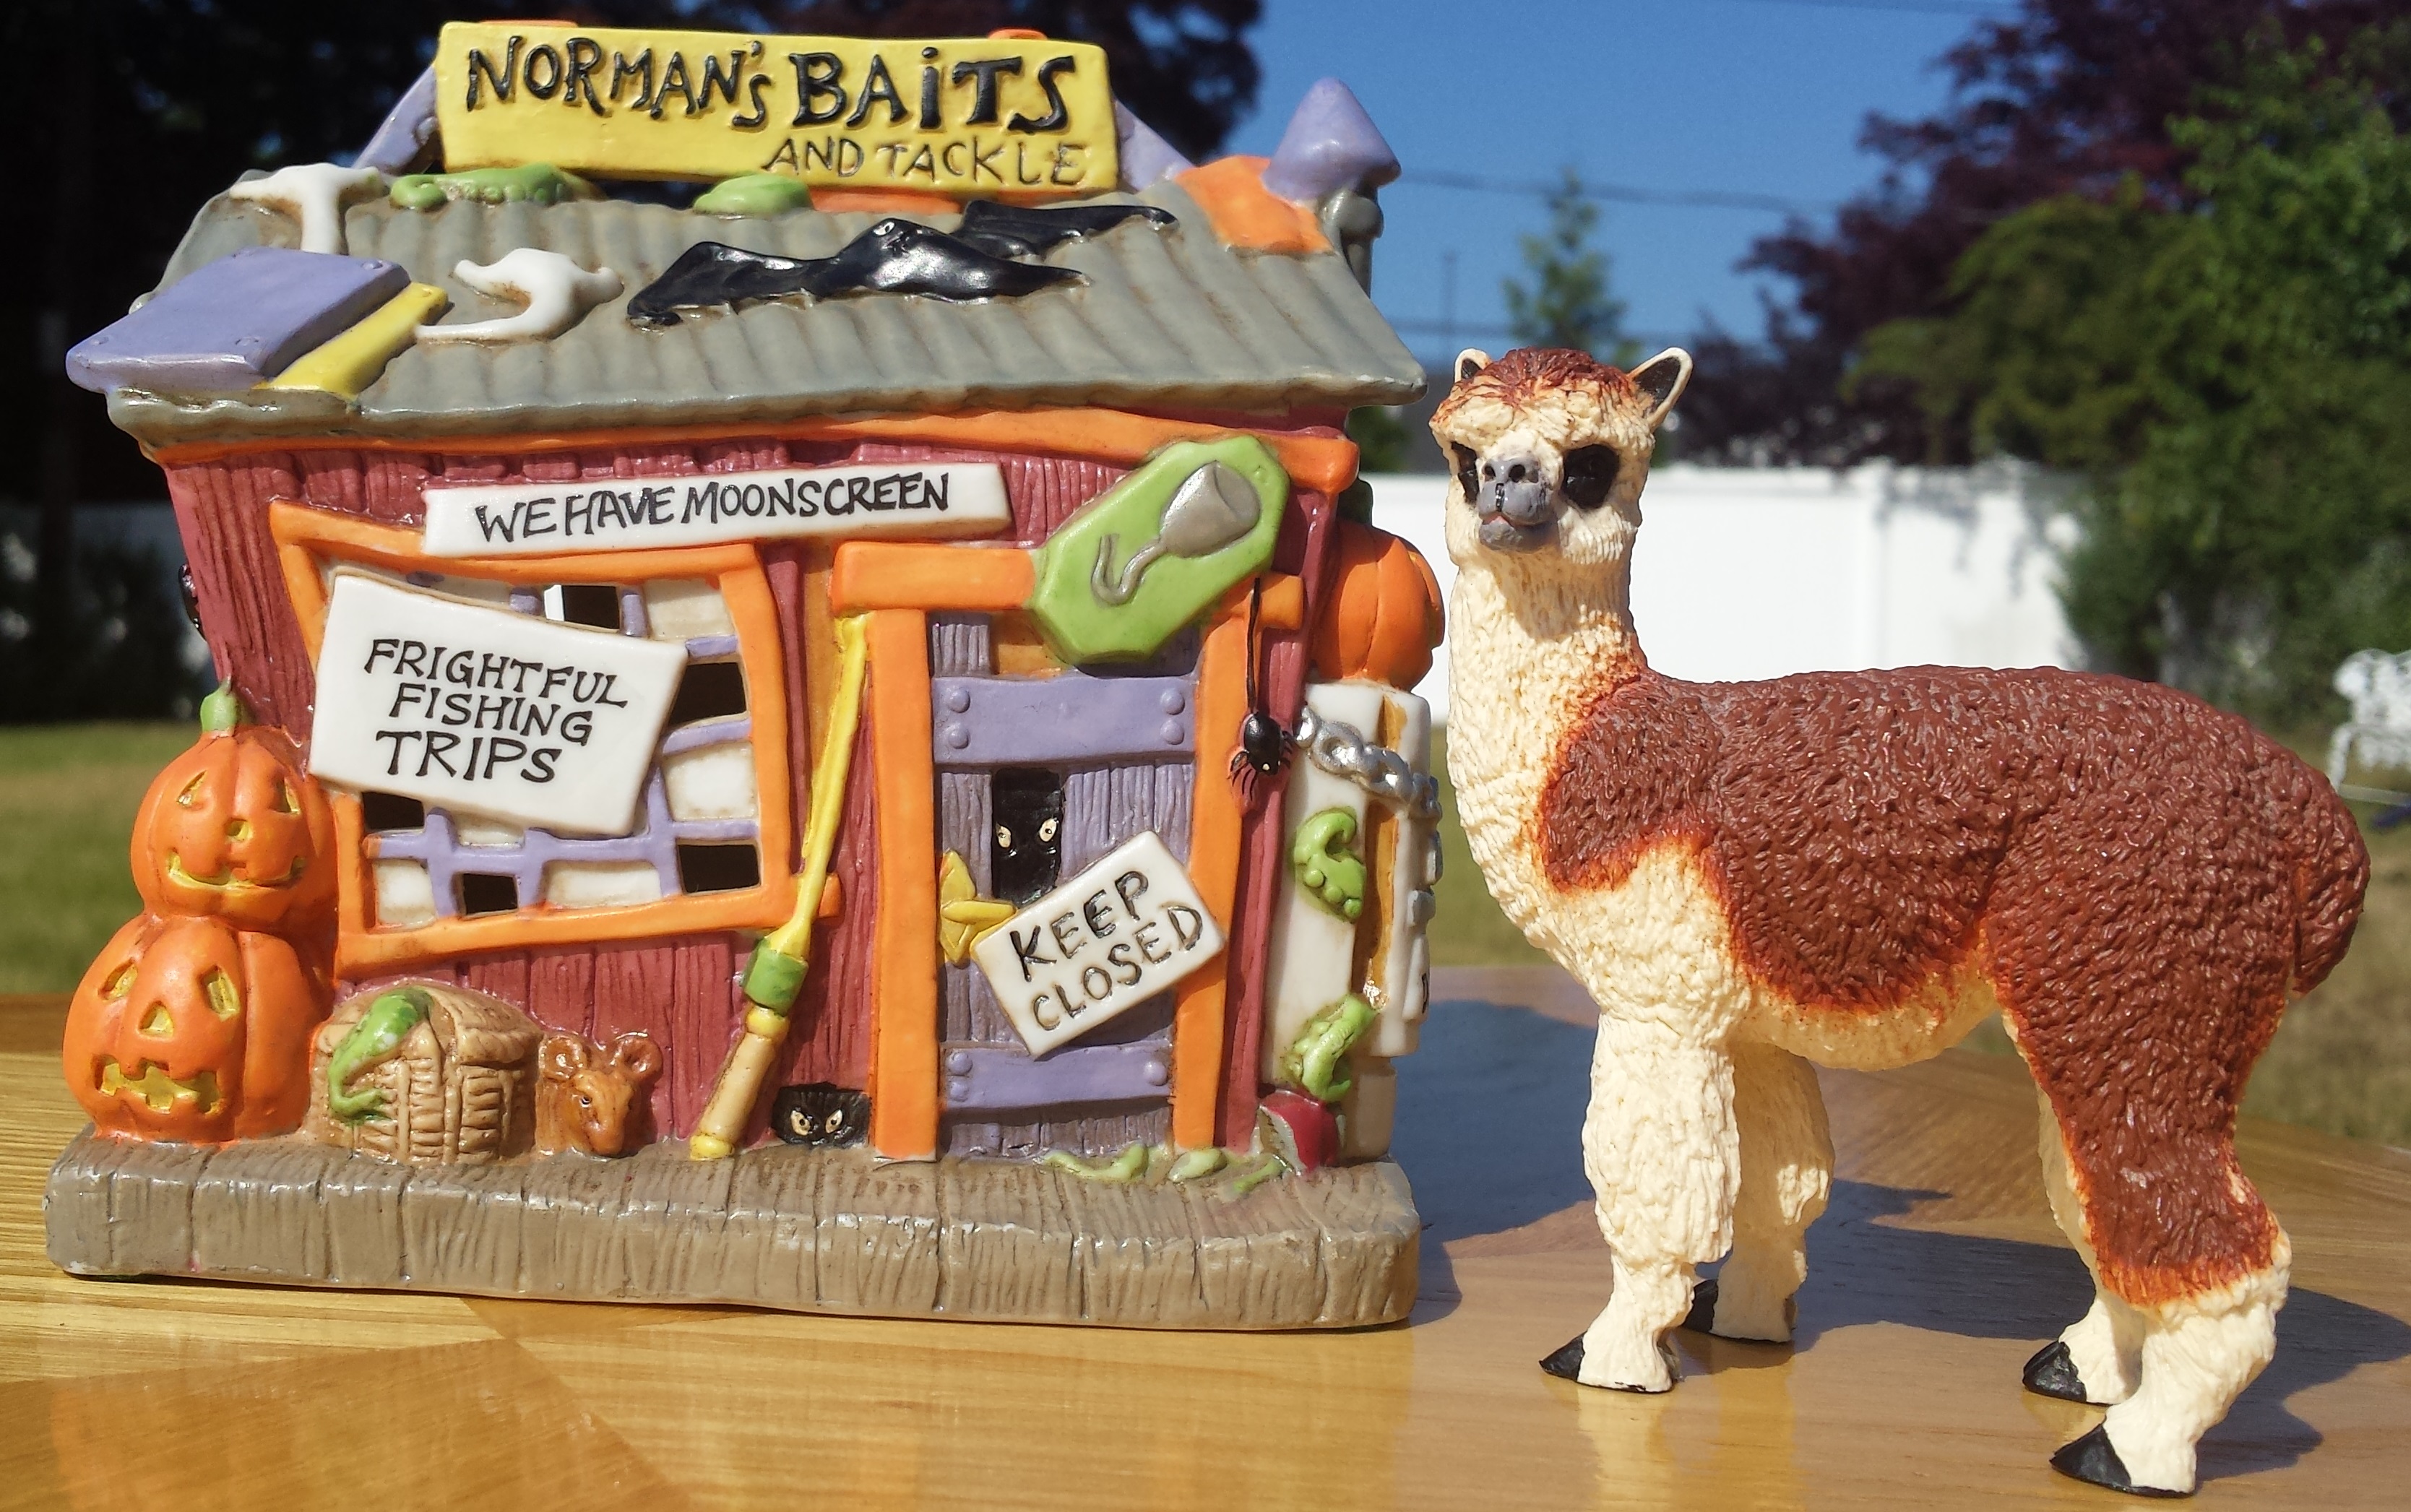 Ruffo the Alpaca standing outside Normans Baits and Tackle store